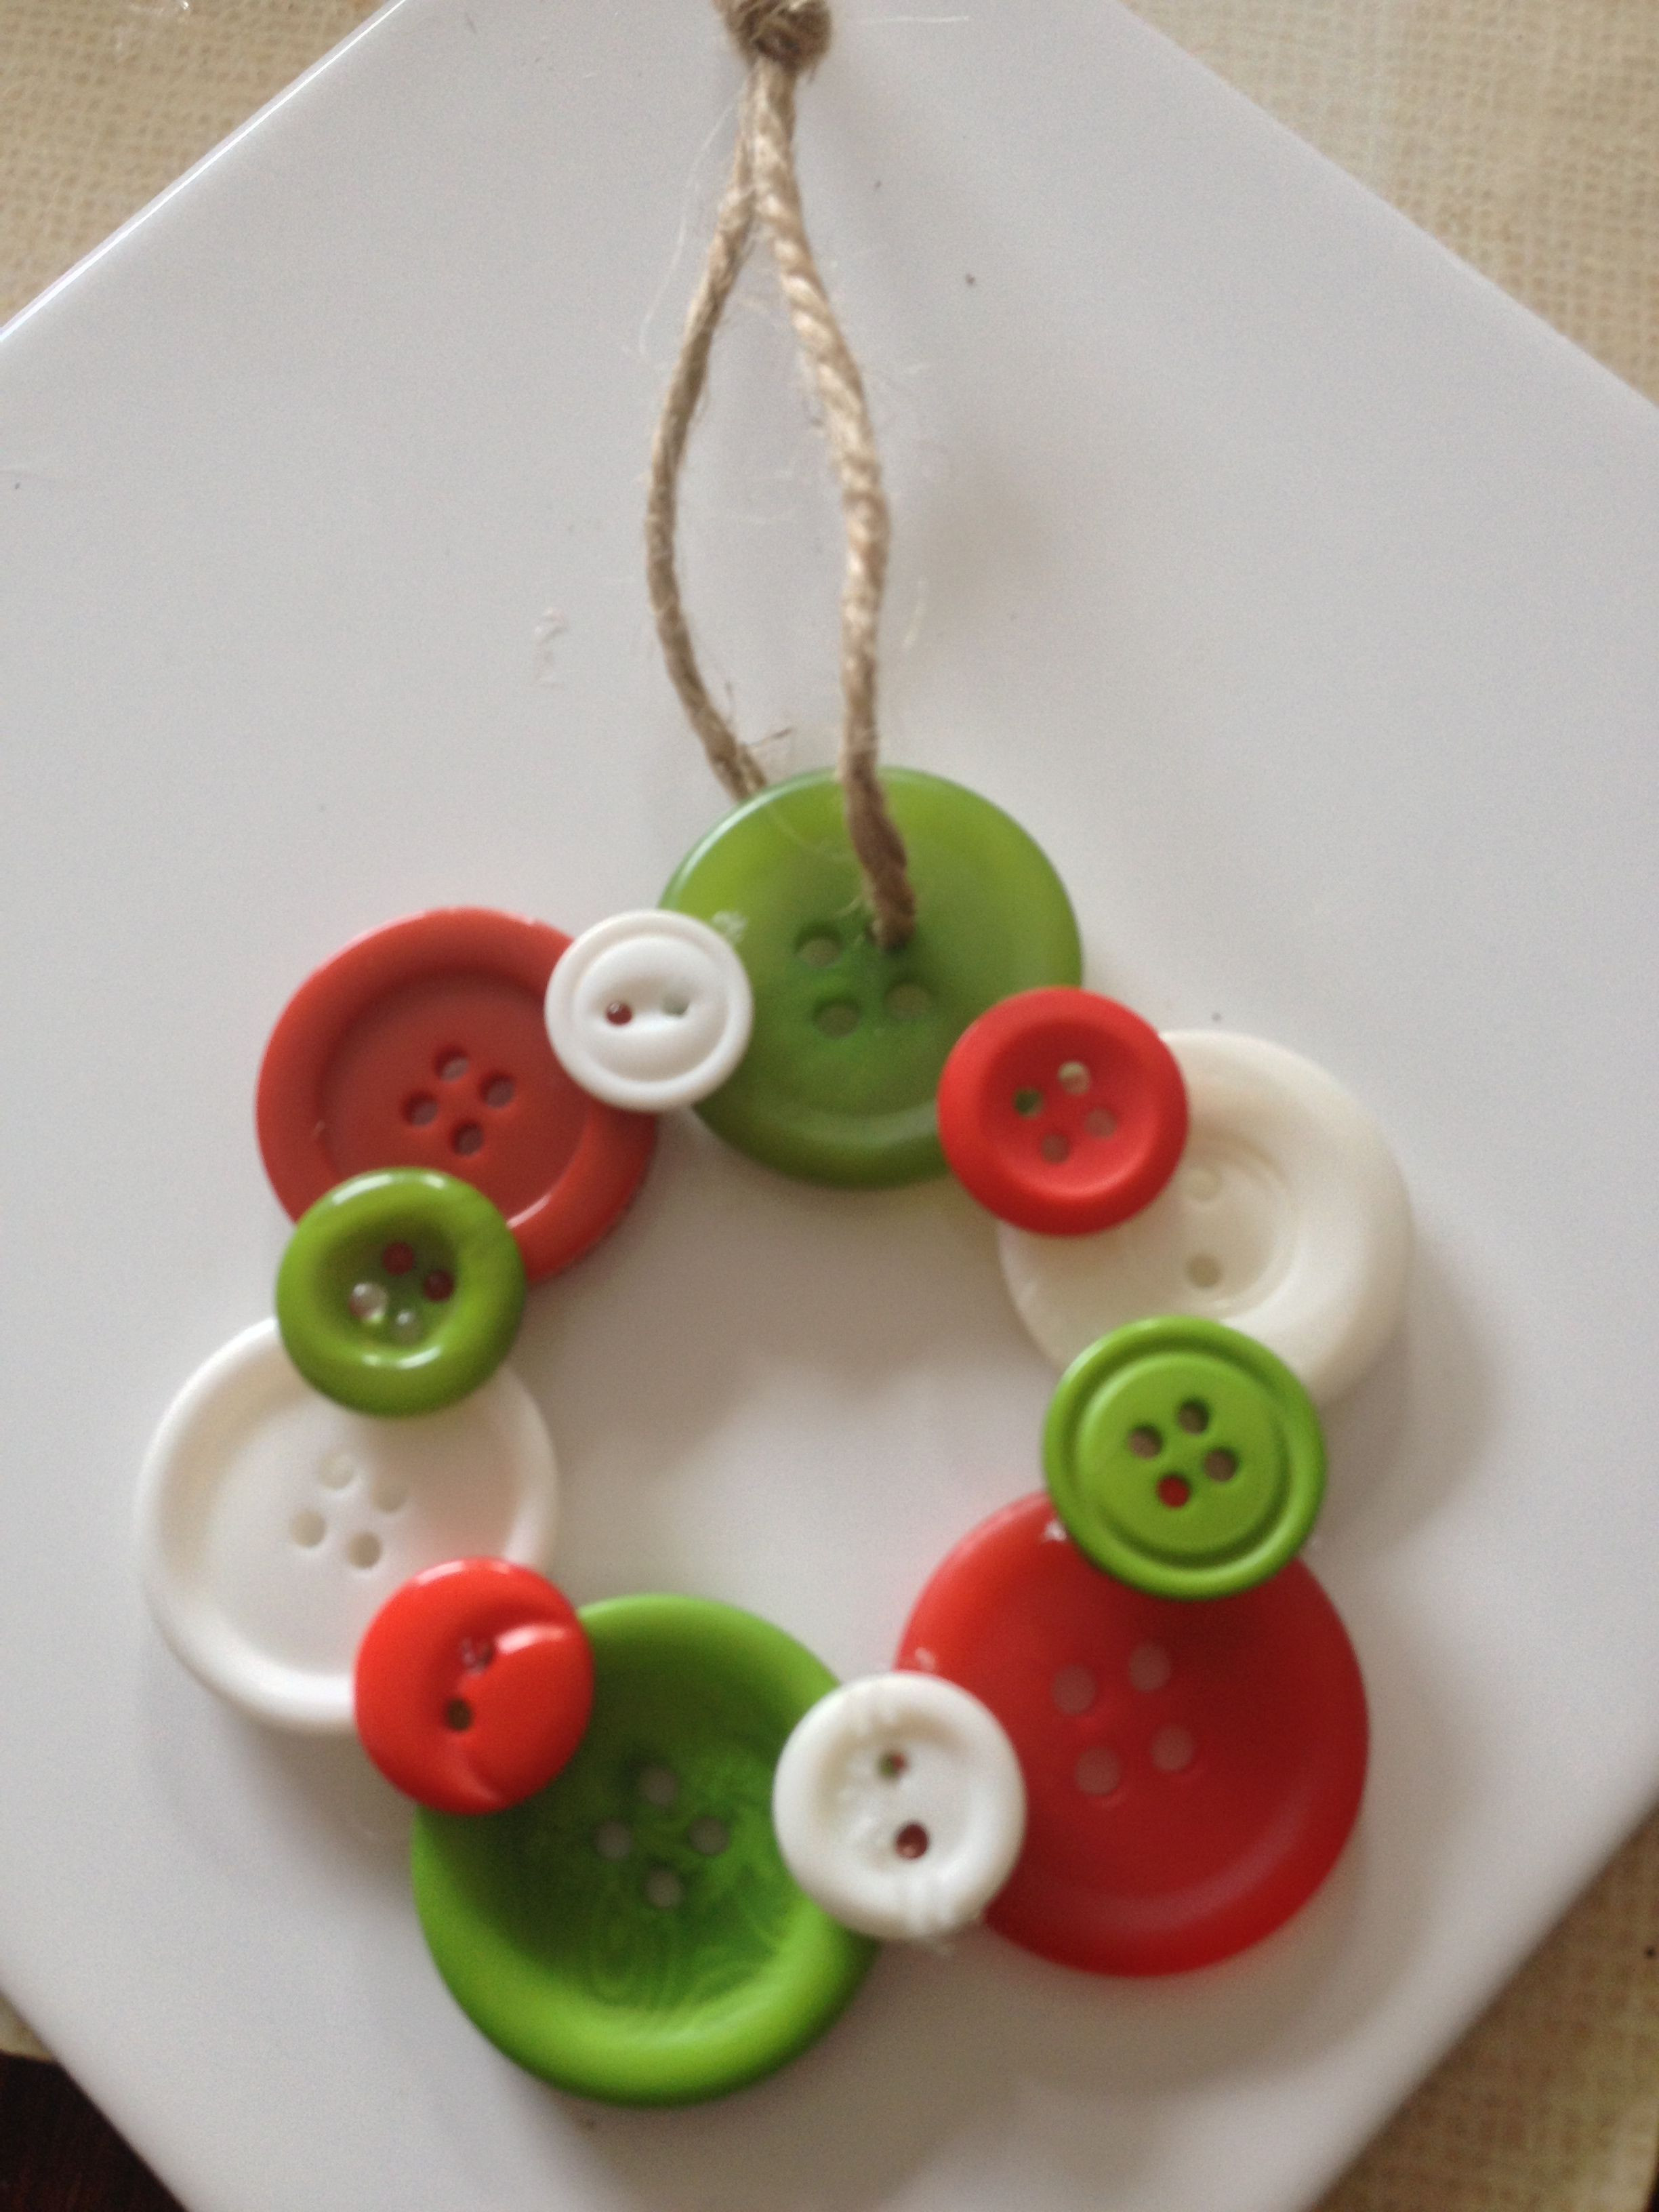 Christmas Ornament Craft Ideas
 Button ornament for Christmas tree